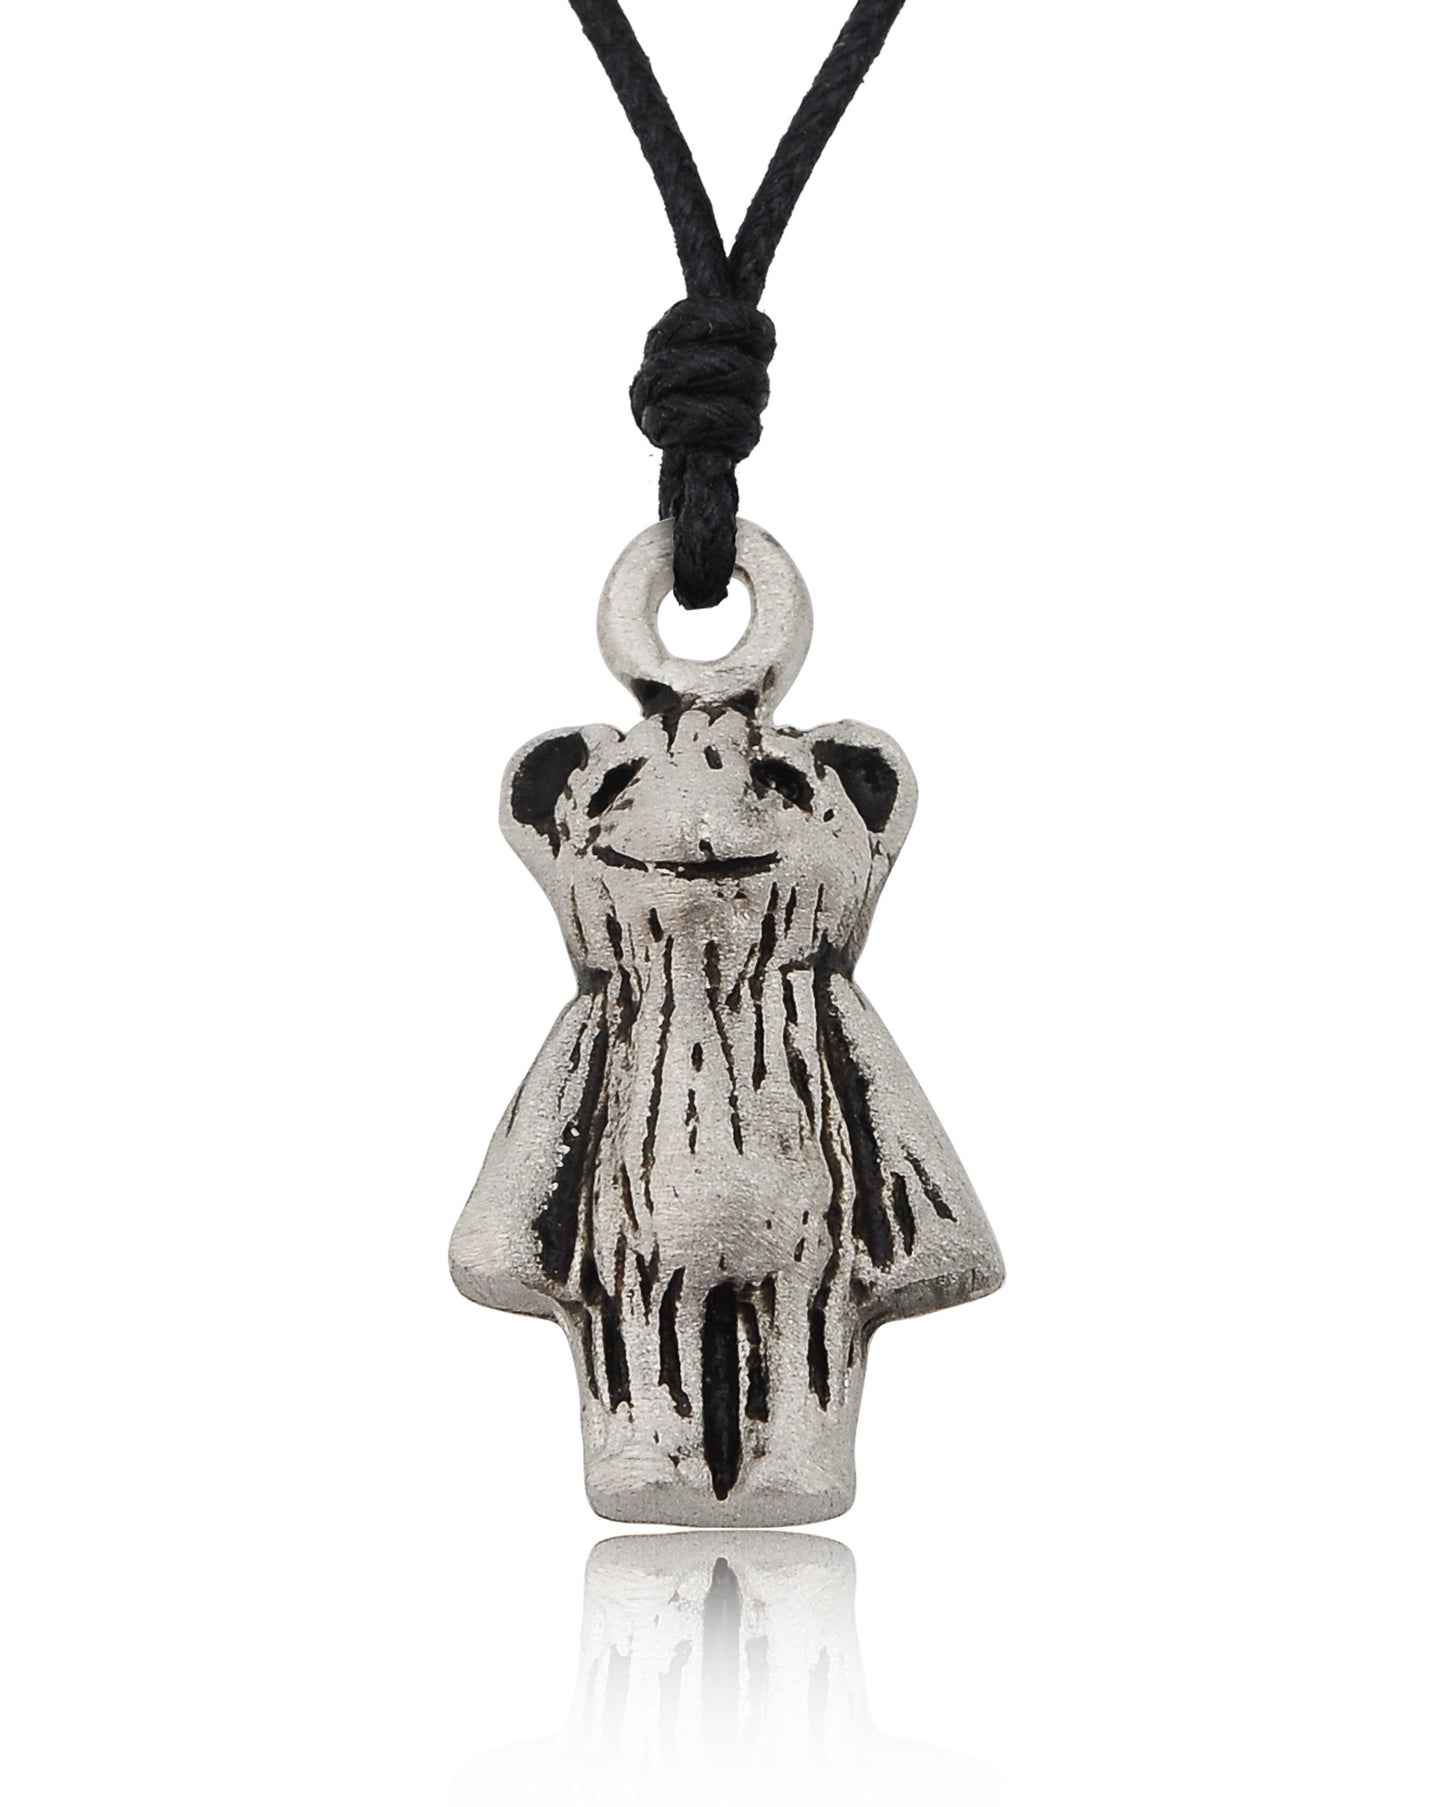 Teddy Bear Doll Charm  Silver Pewter Charm Necklace Pendant Jewelry With Cotton Cord